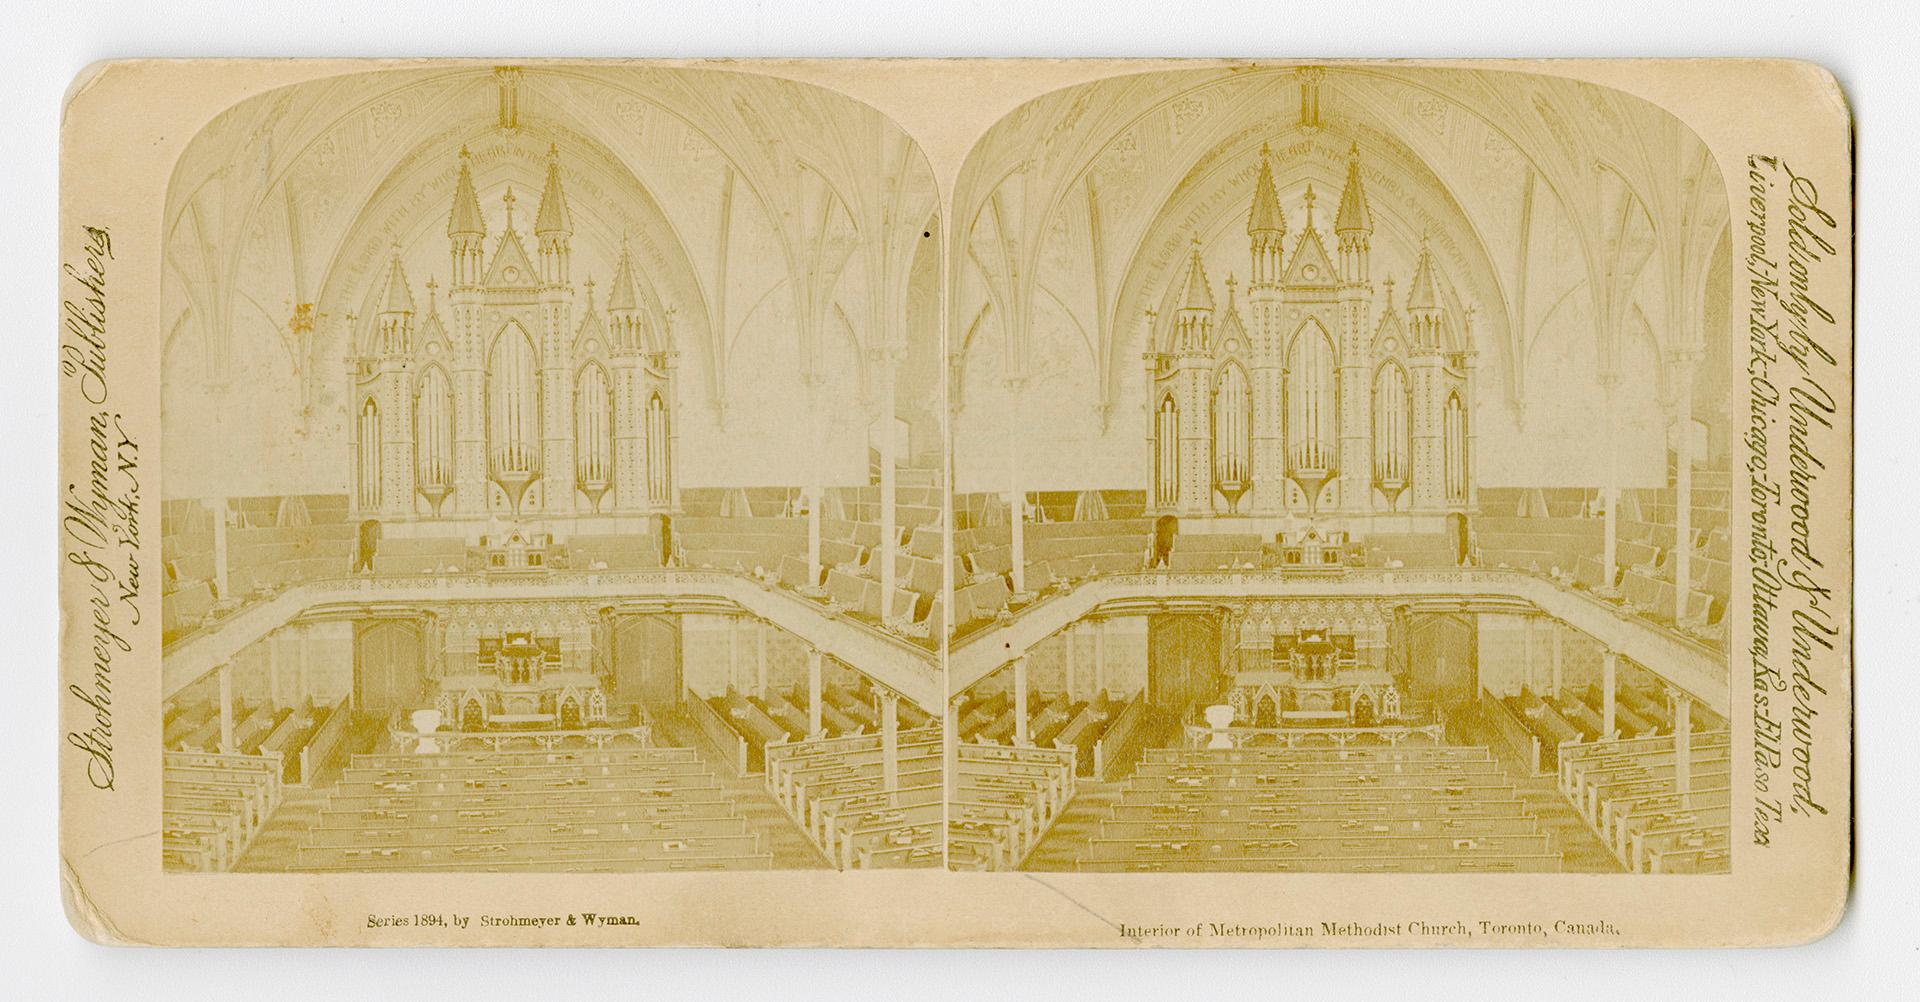 Pictures show the interior of a large gothic church.